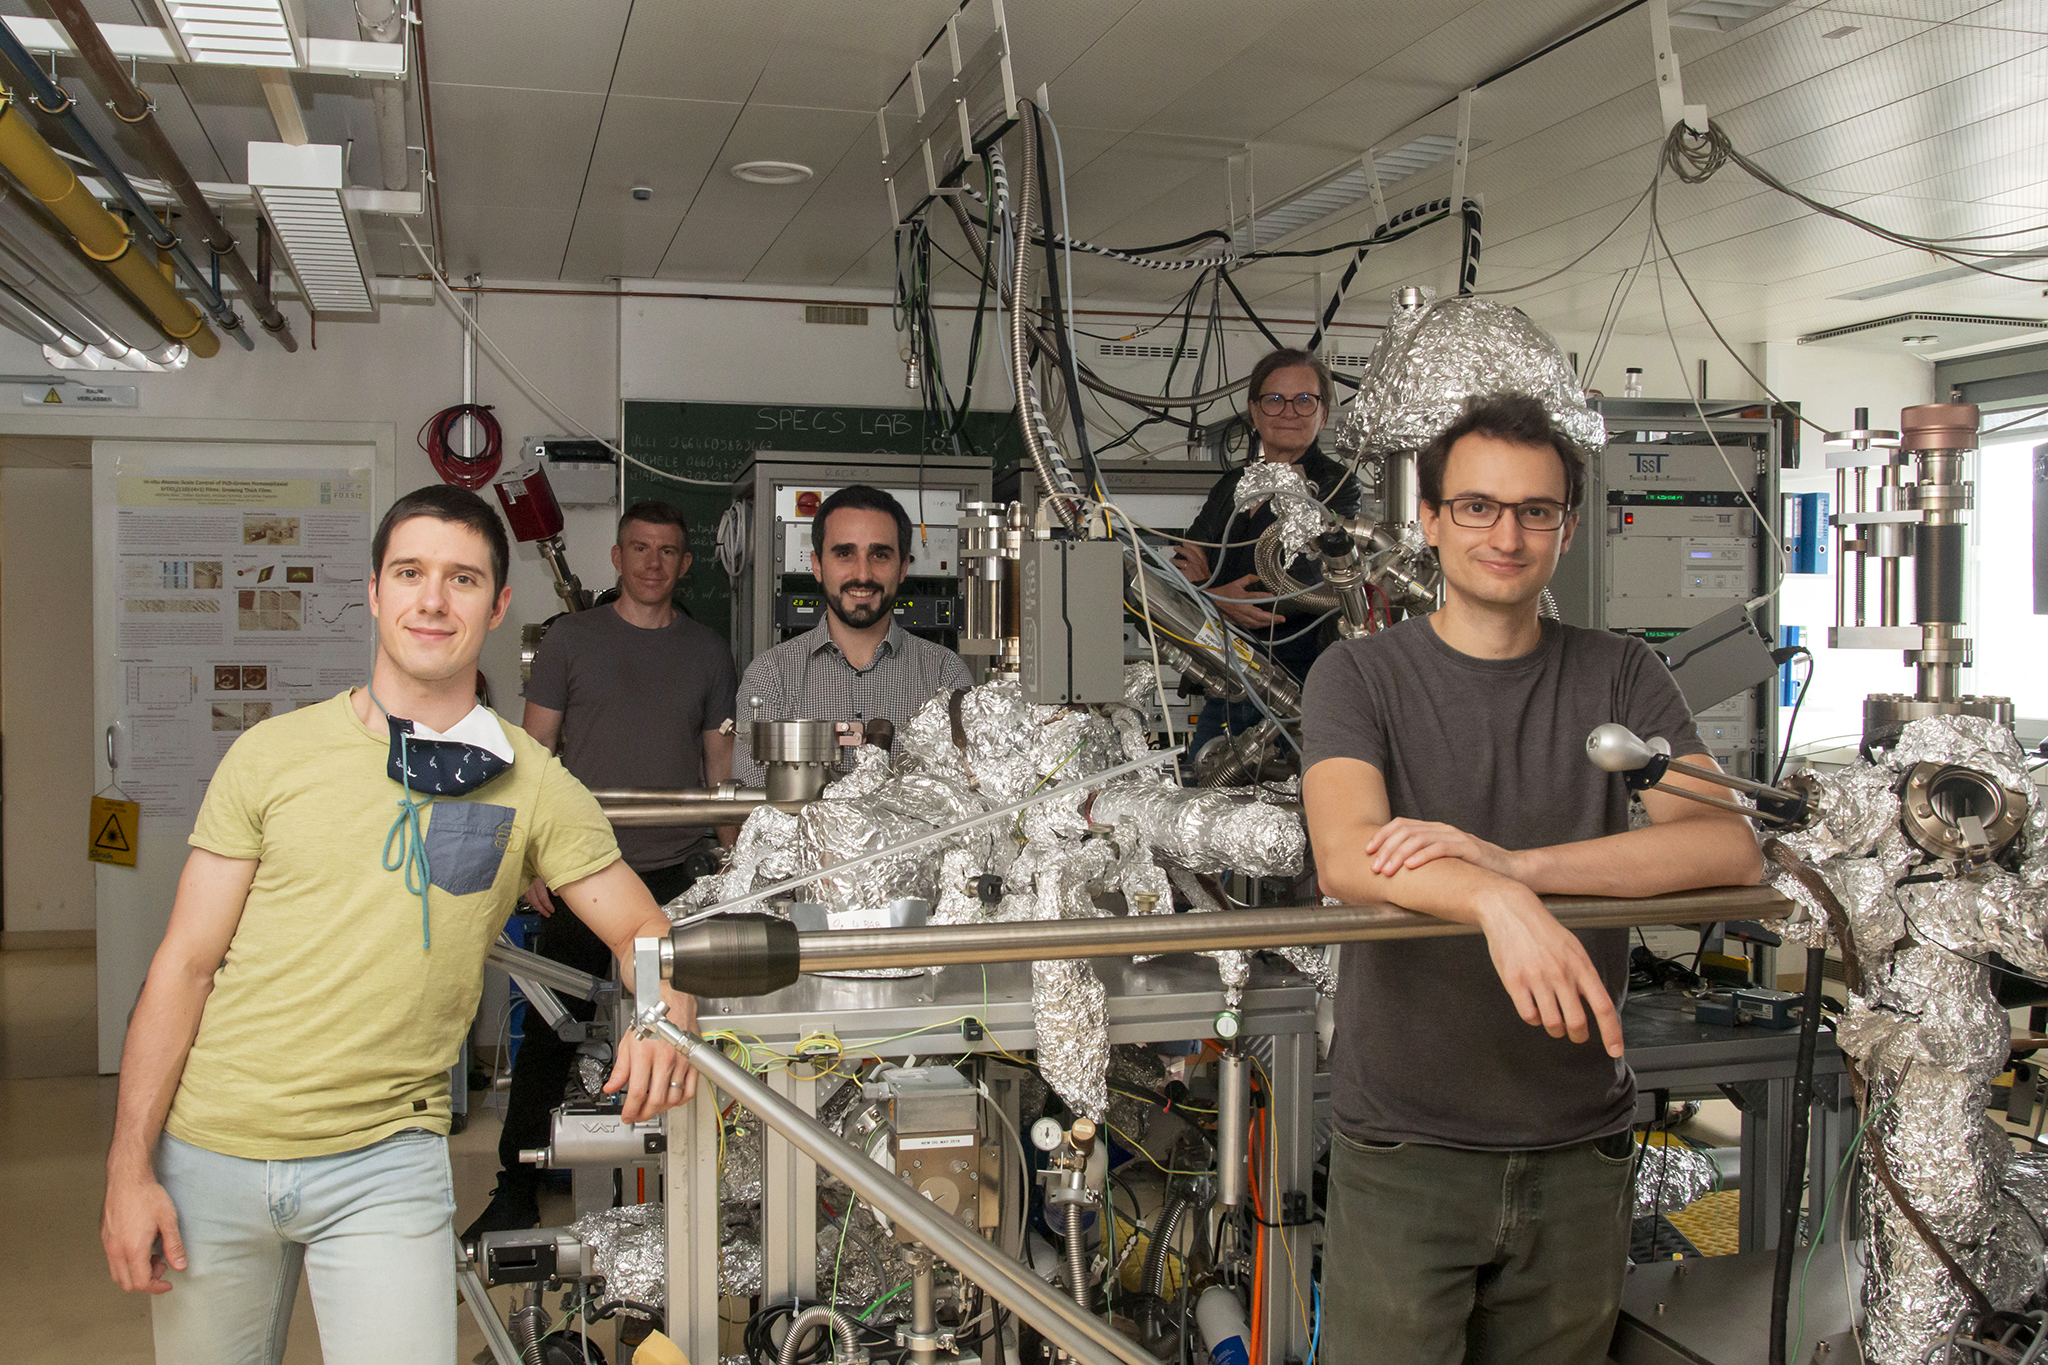 The 5-person team in a large research laboratory, all around a large vacuum system.